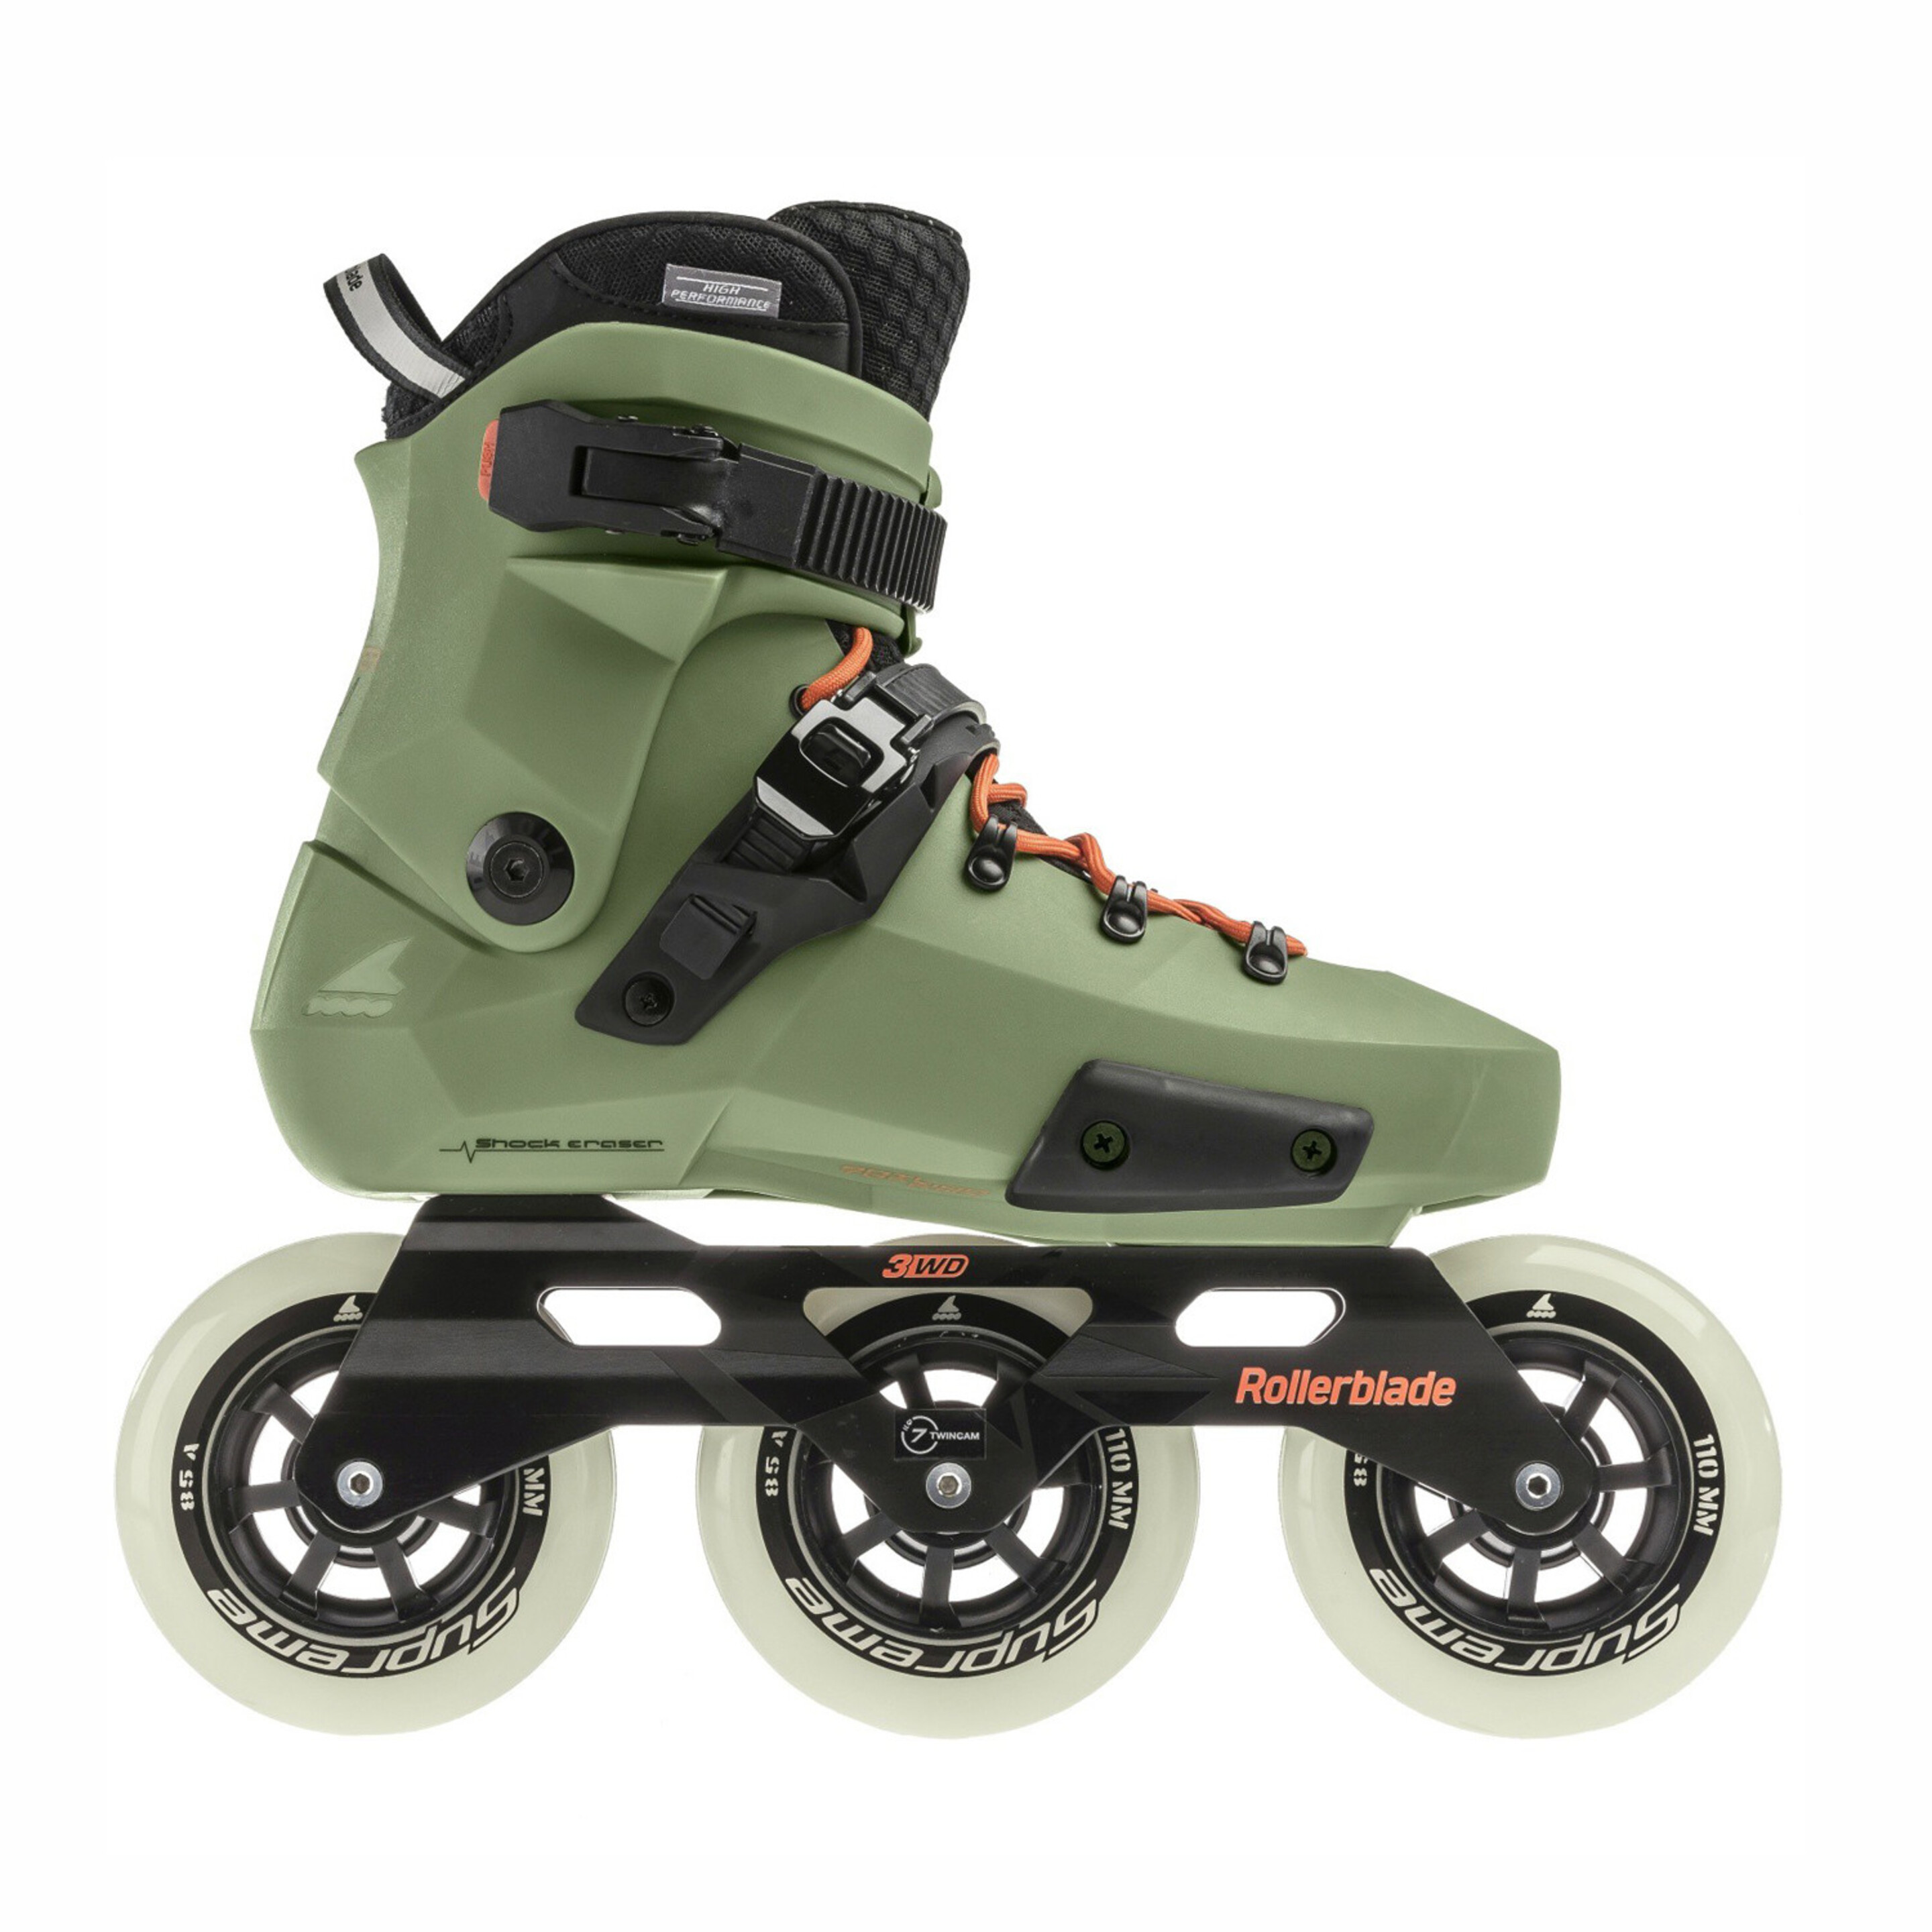 Patines Twister Edge Edition #2 Rollerblade